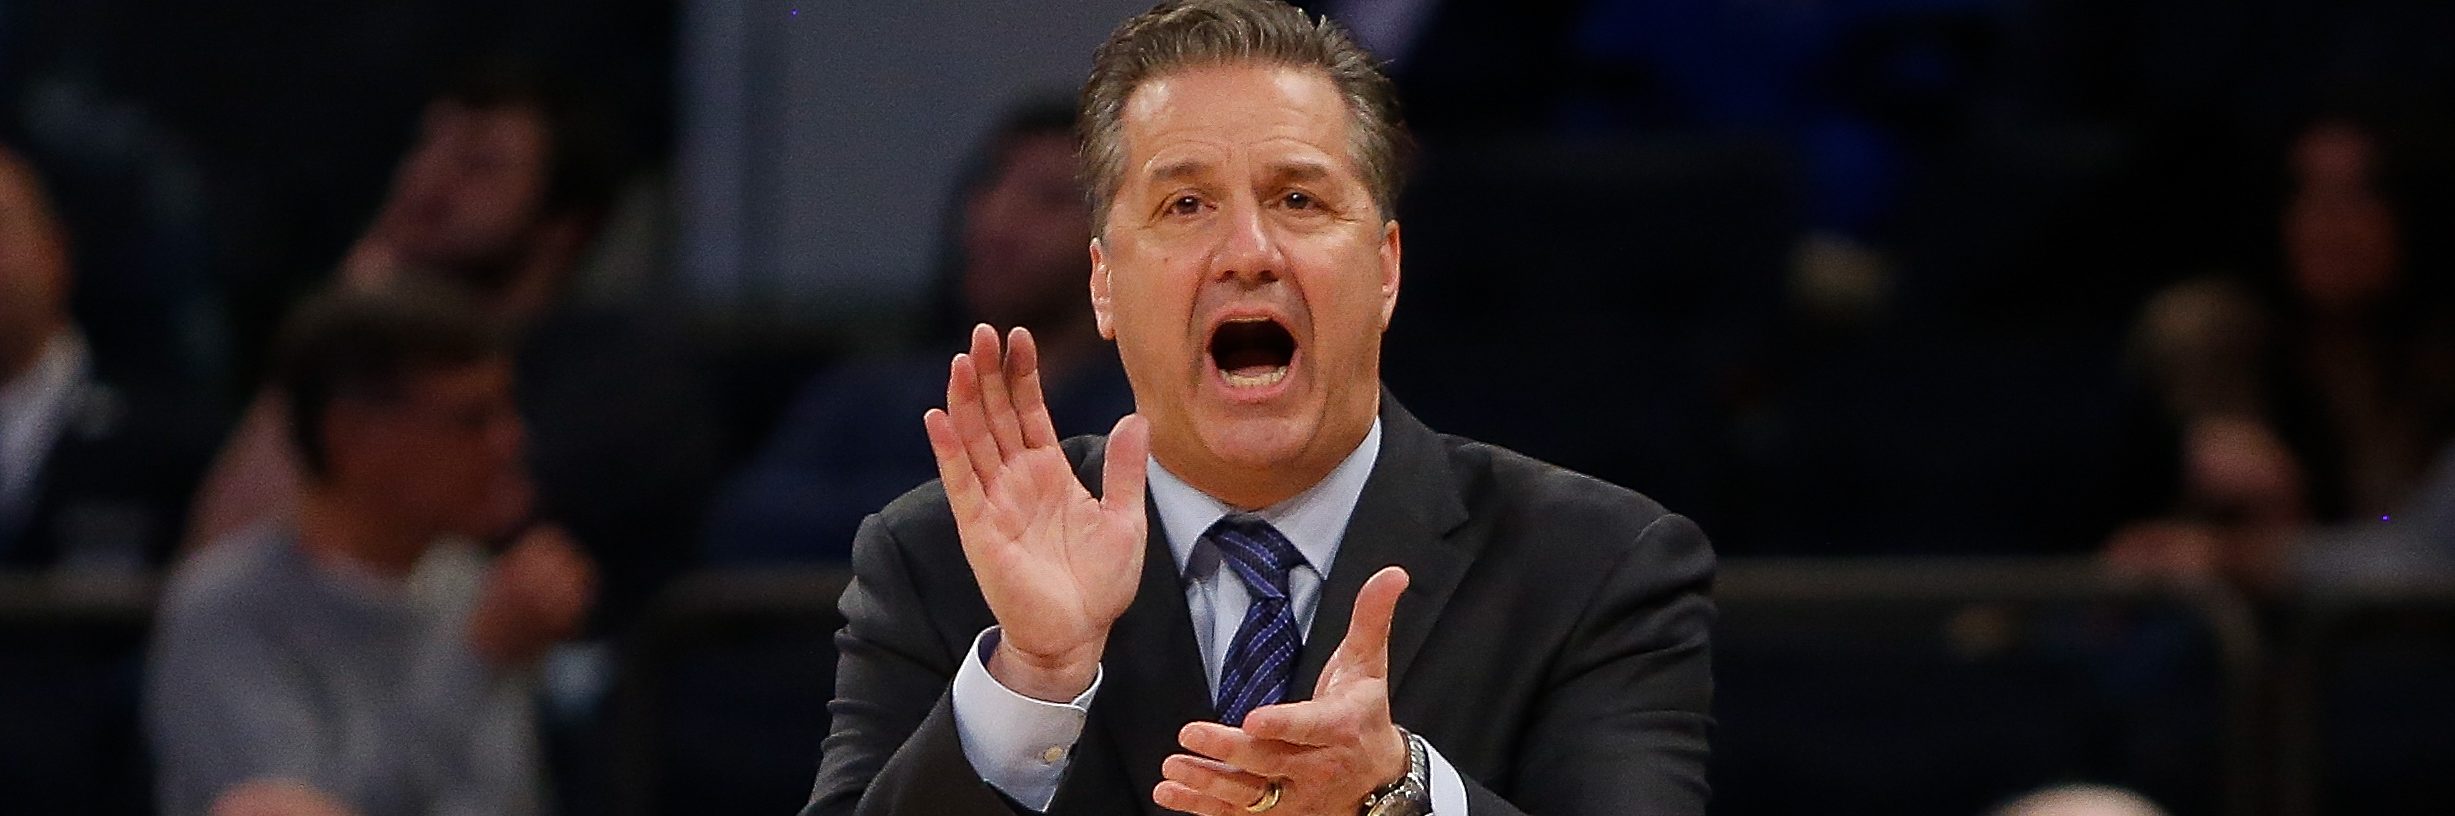 Head coach John Calipari of the Kentucky Wildcats reacts against the Monmouth Hawks. (Photo by Michael Reaves/Getty Images)